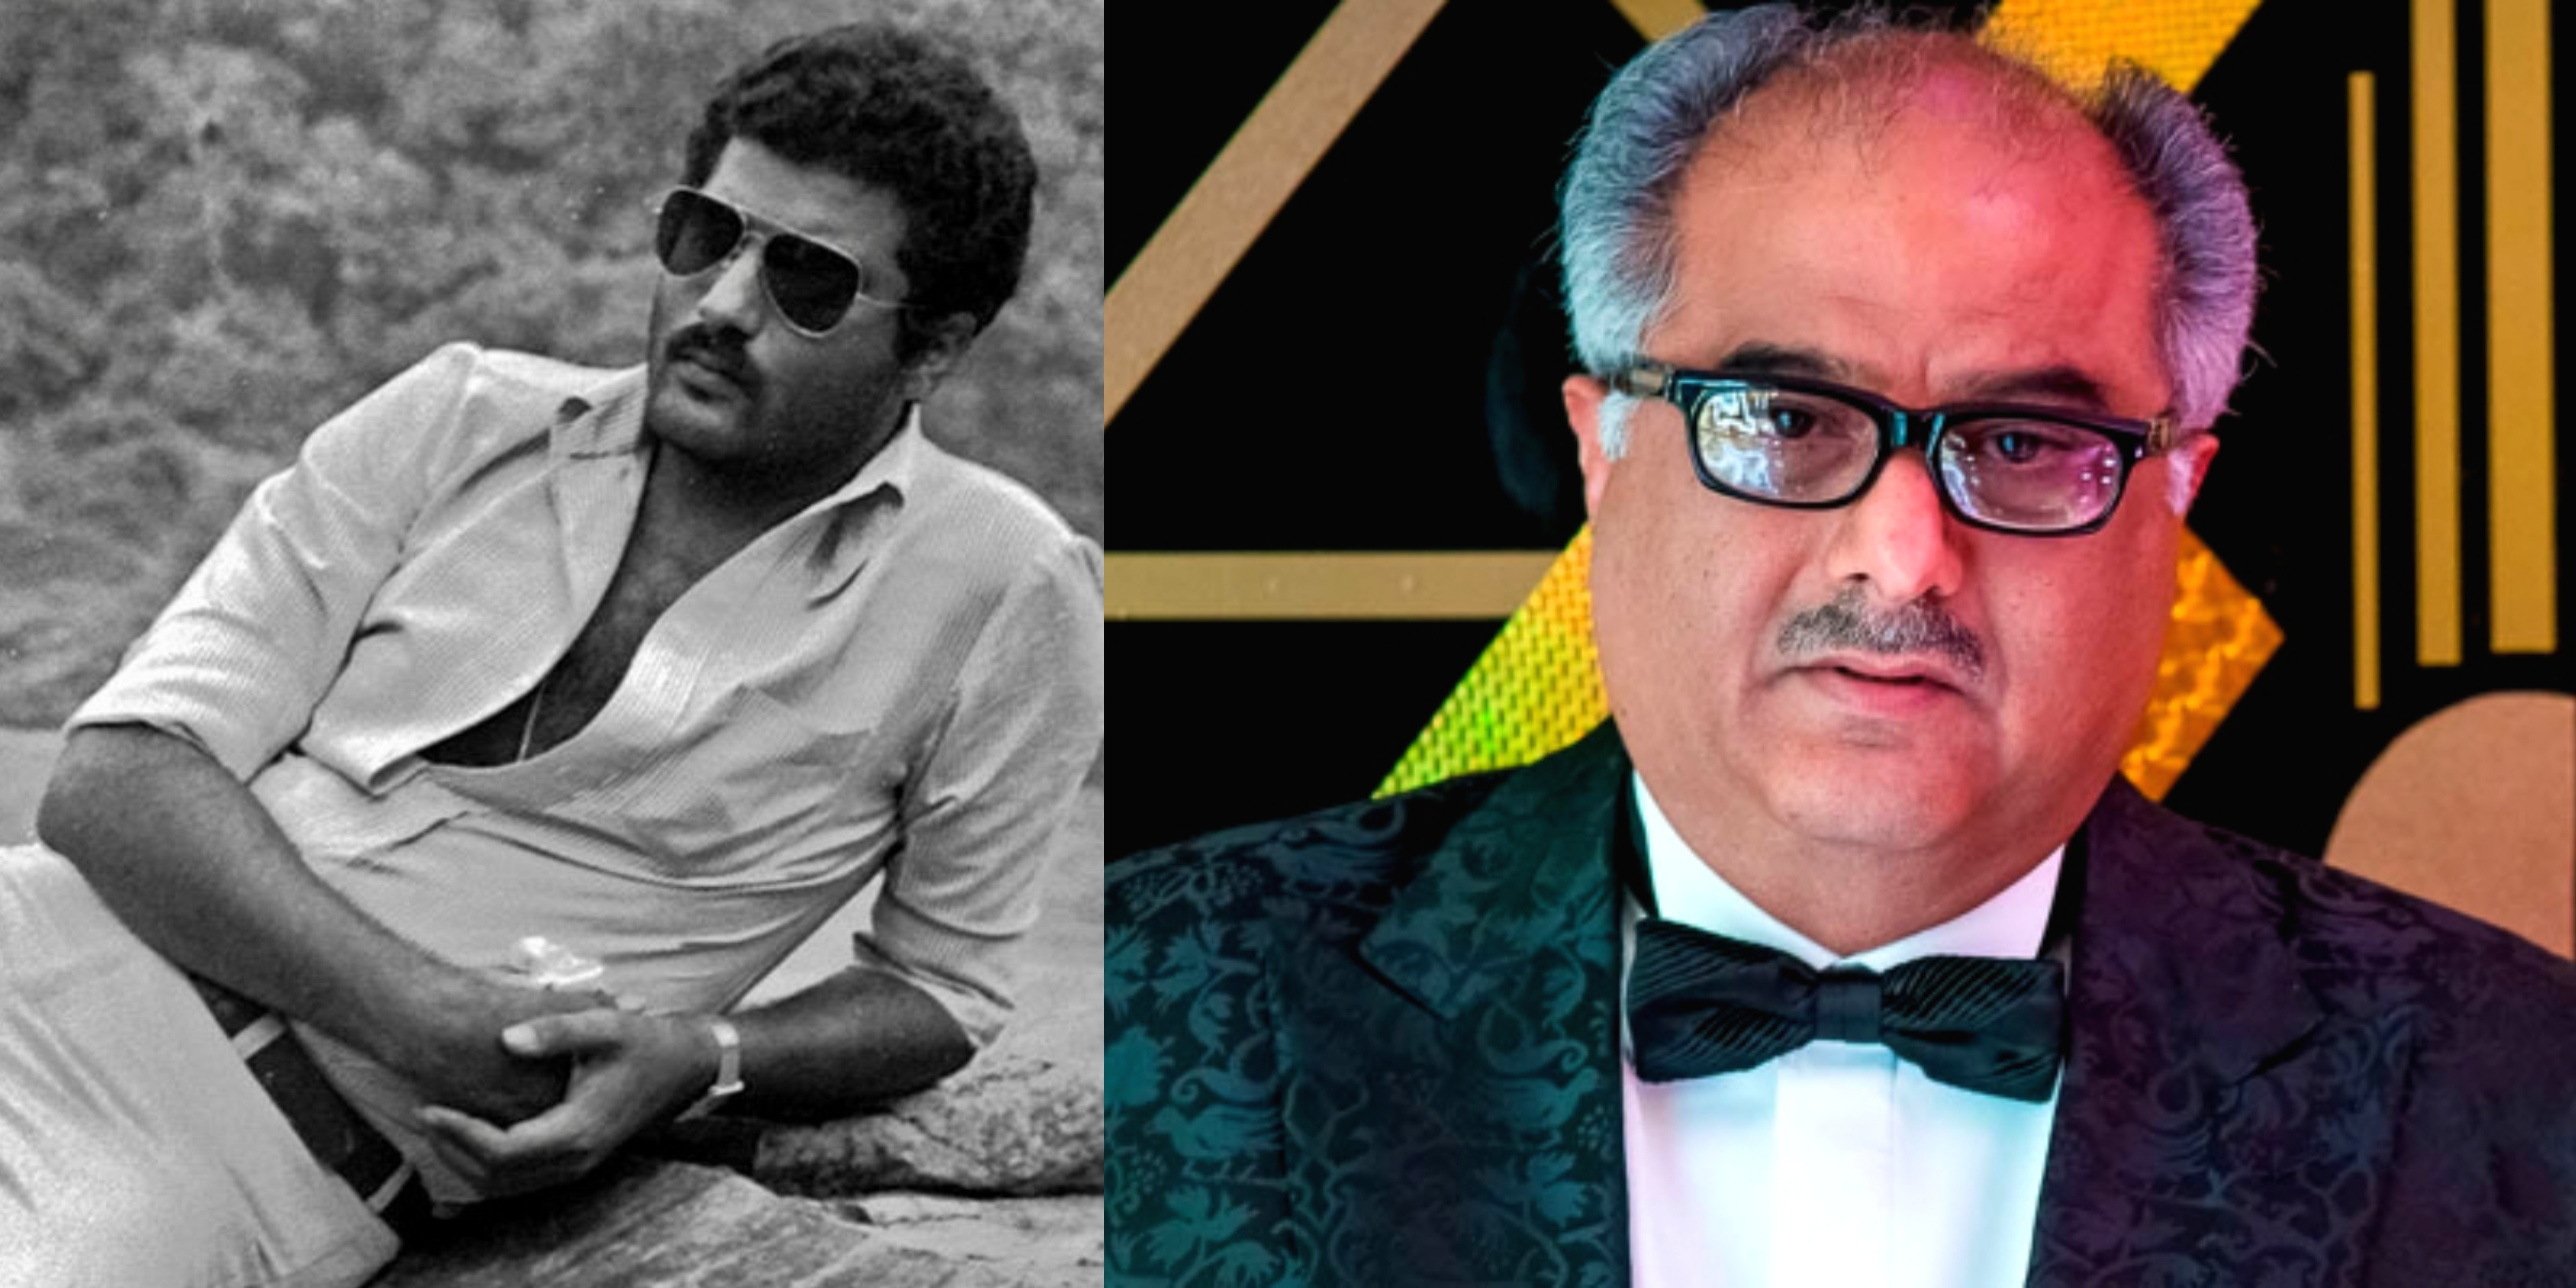 Thala Ajith’s Valimai producer Boney Kapoor and his inseparable bond with South Indian Films by Dhiraj Kumar